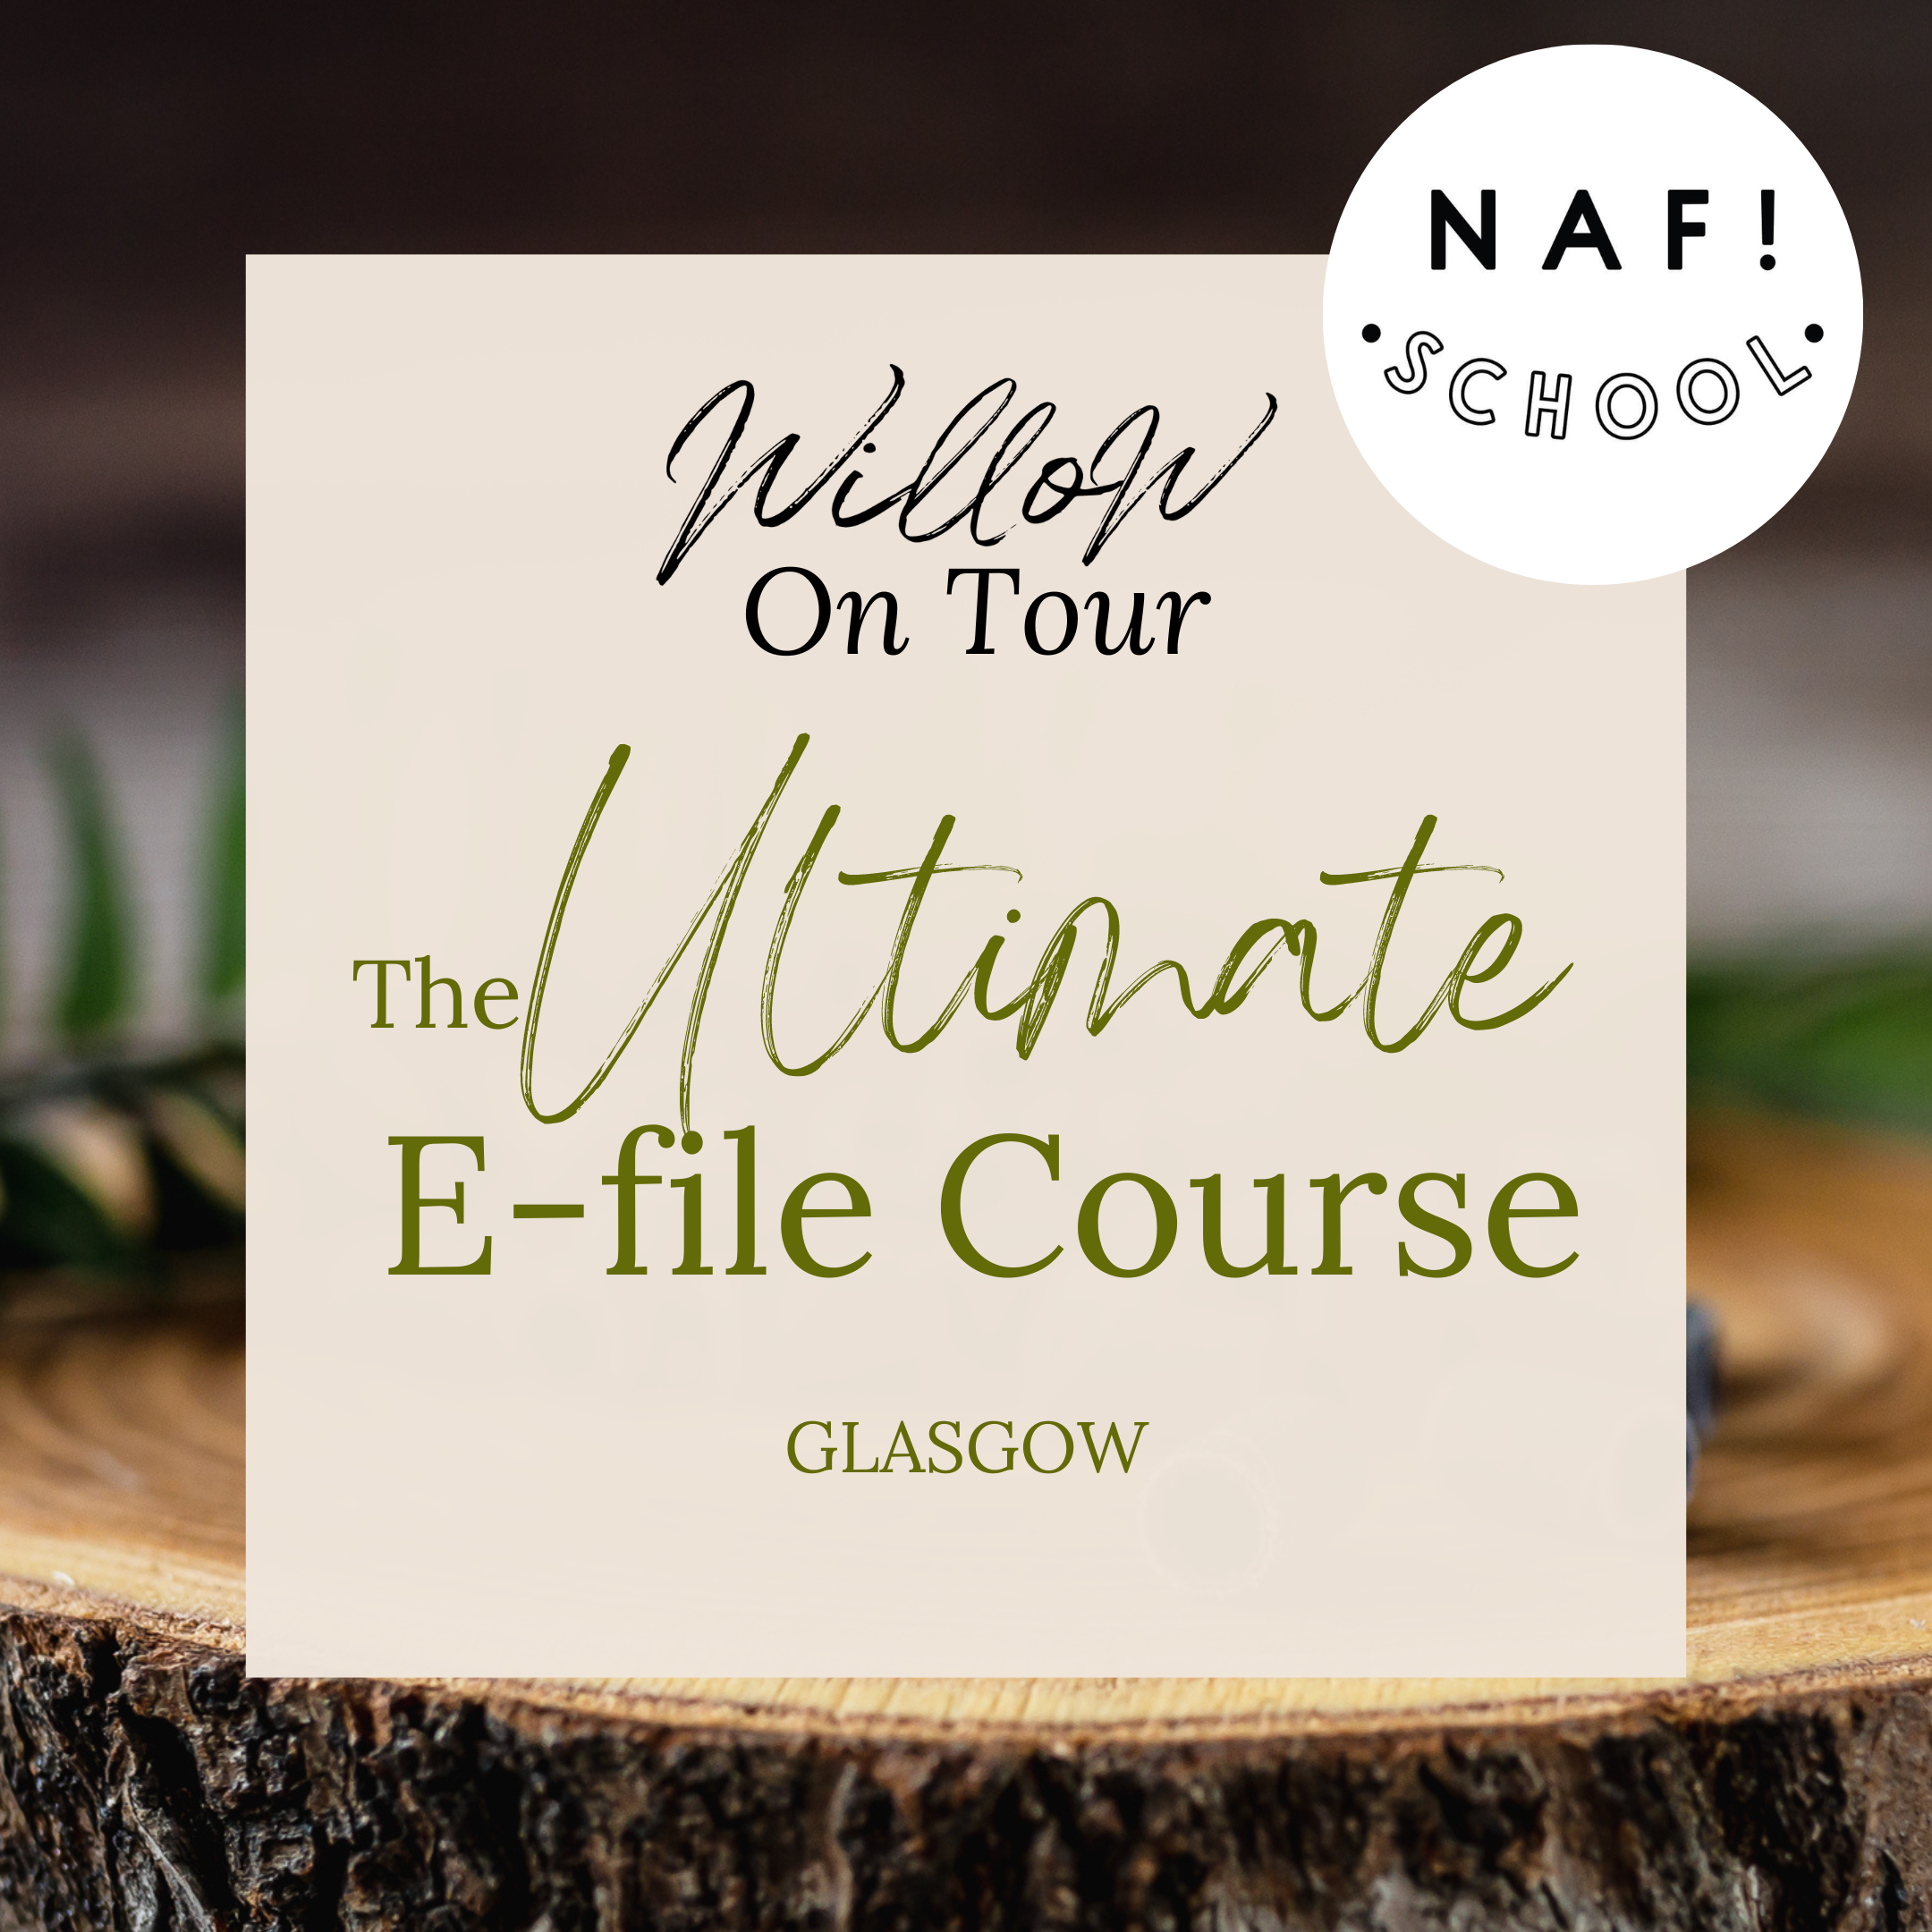 Willow On Tour: The Ultimate E-file Course - Glasgow